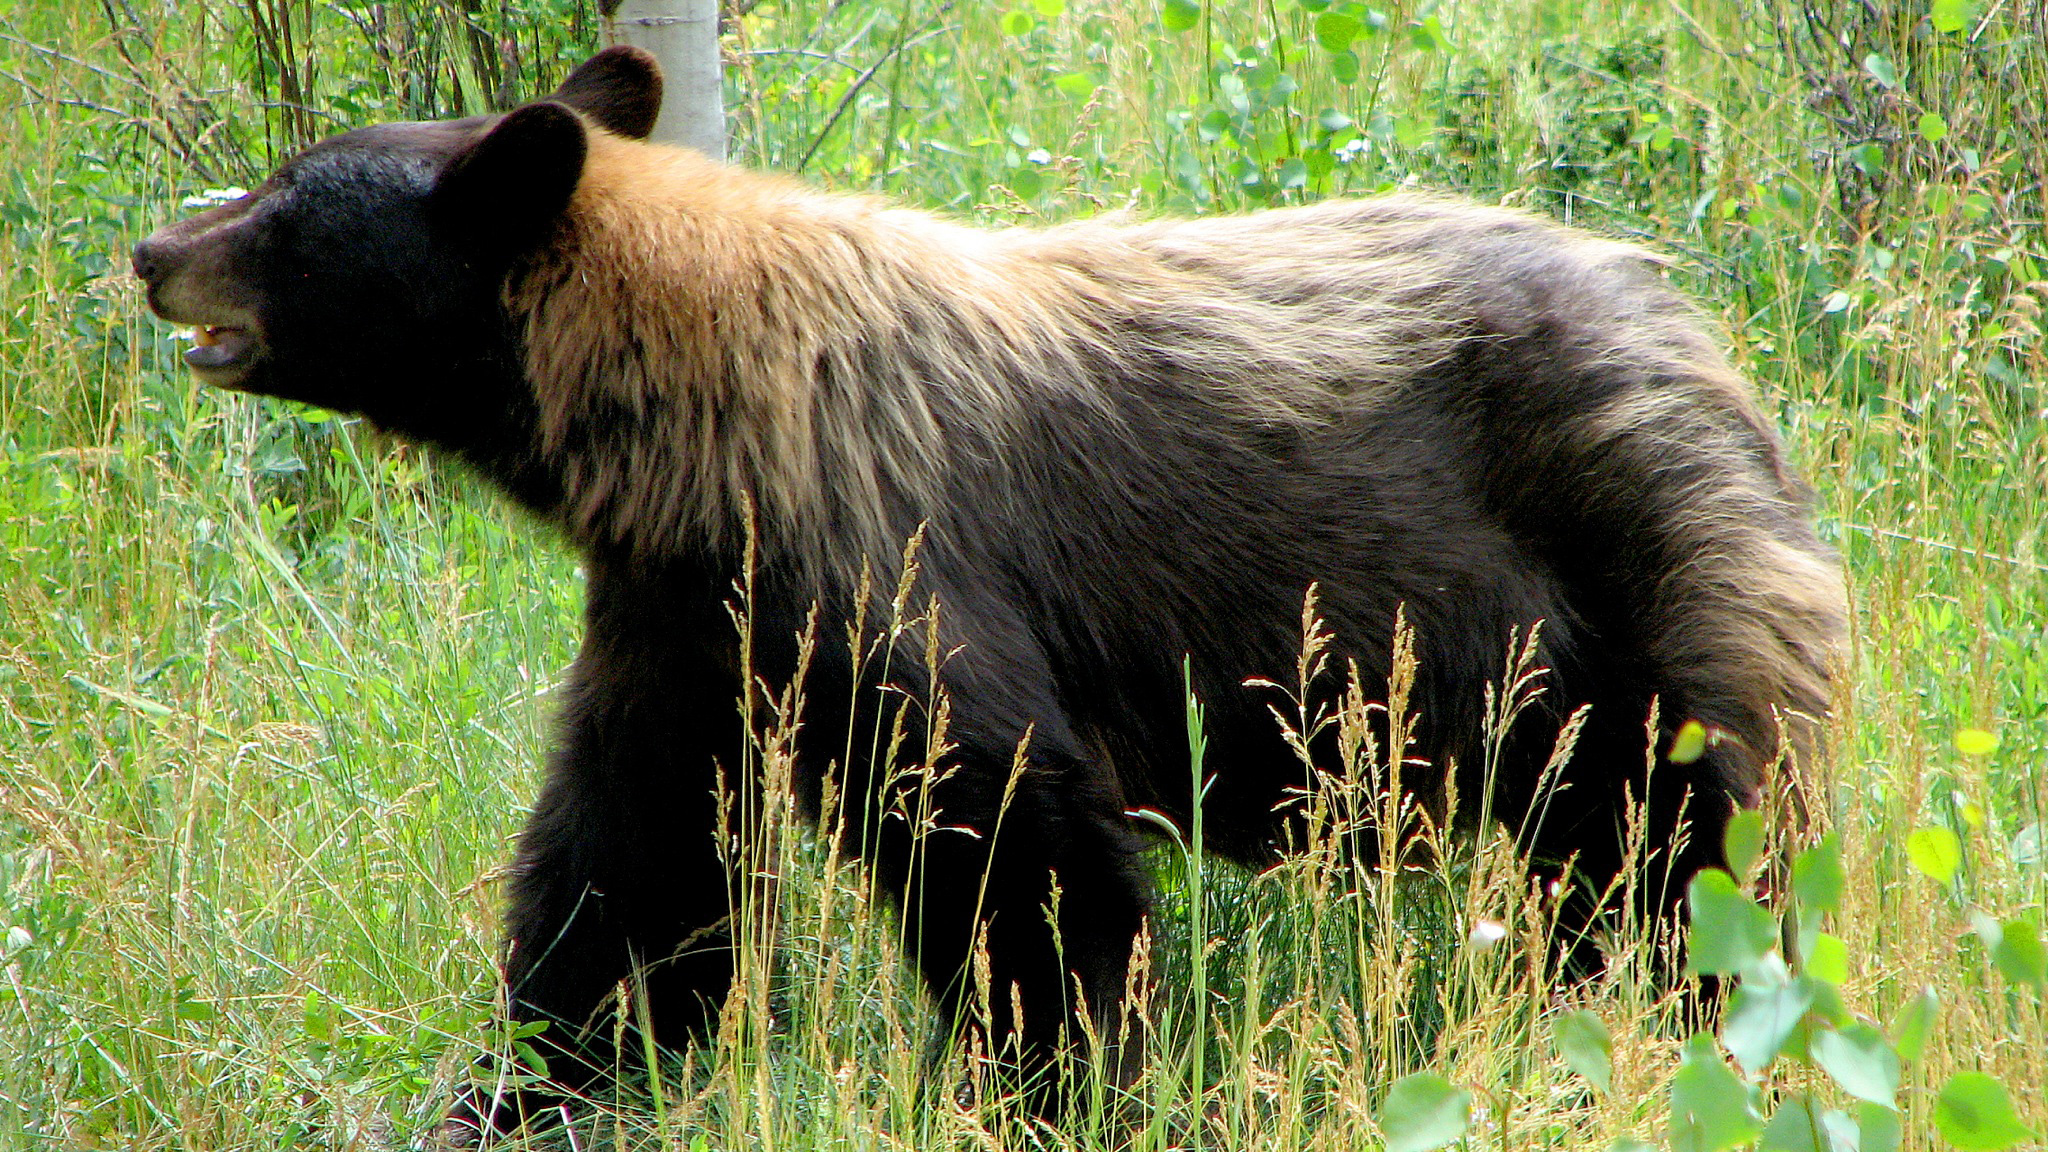 Brown black bear munching spring grass. Photo © Murray Foubister / Wikimedia Commons through a Creative Commons license